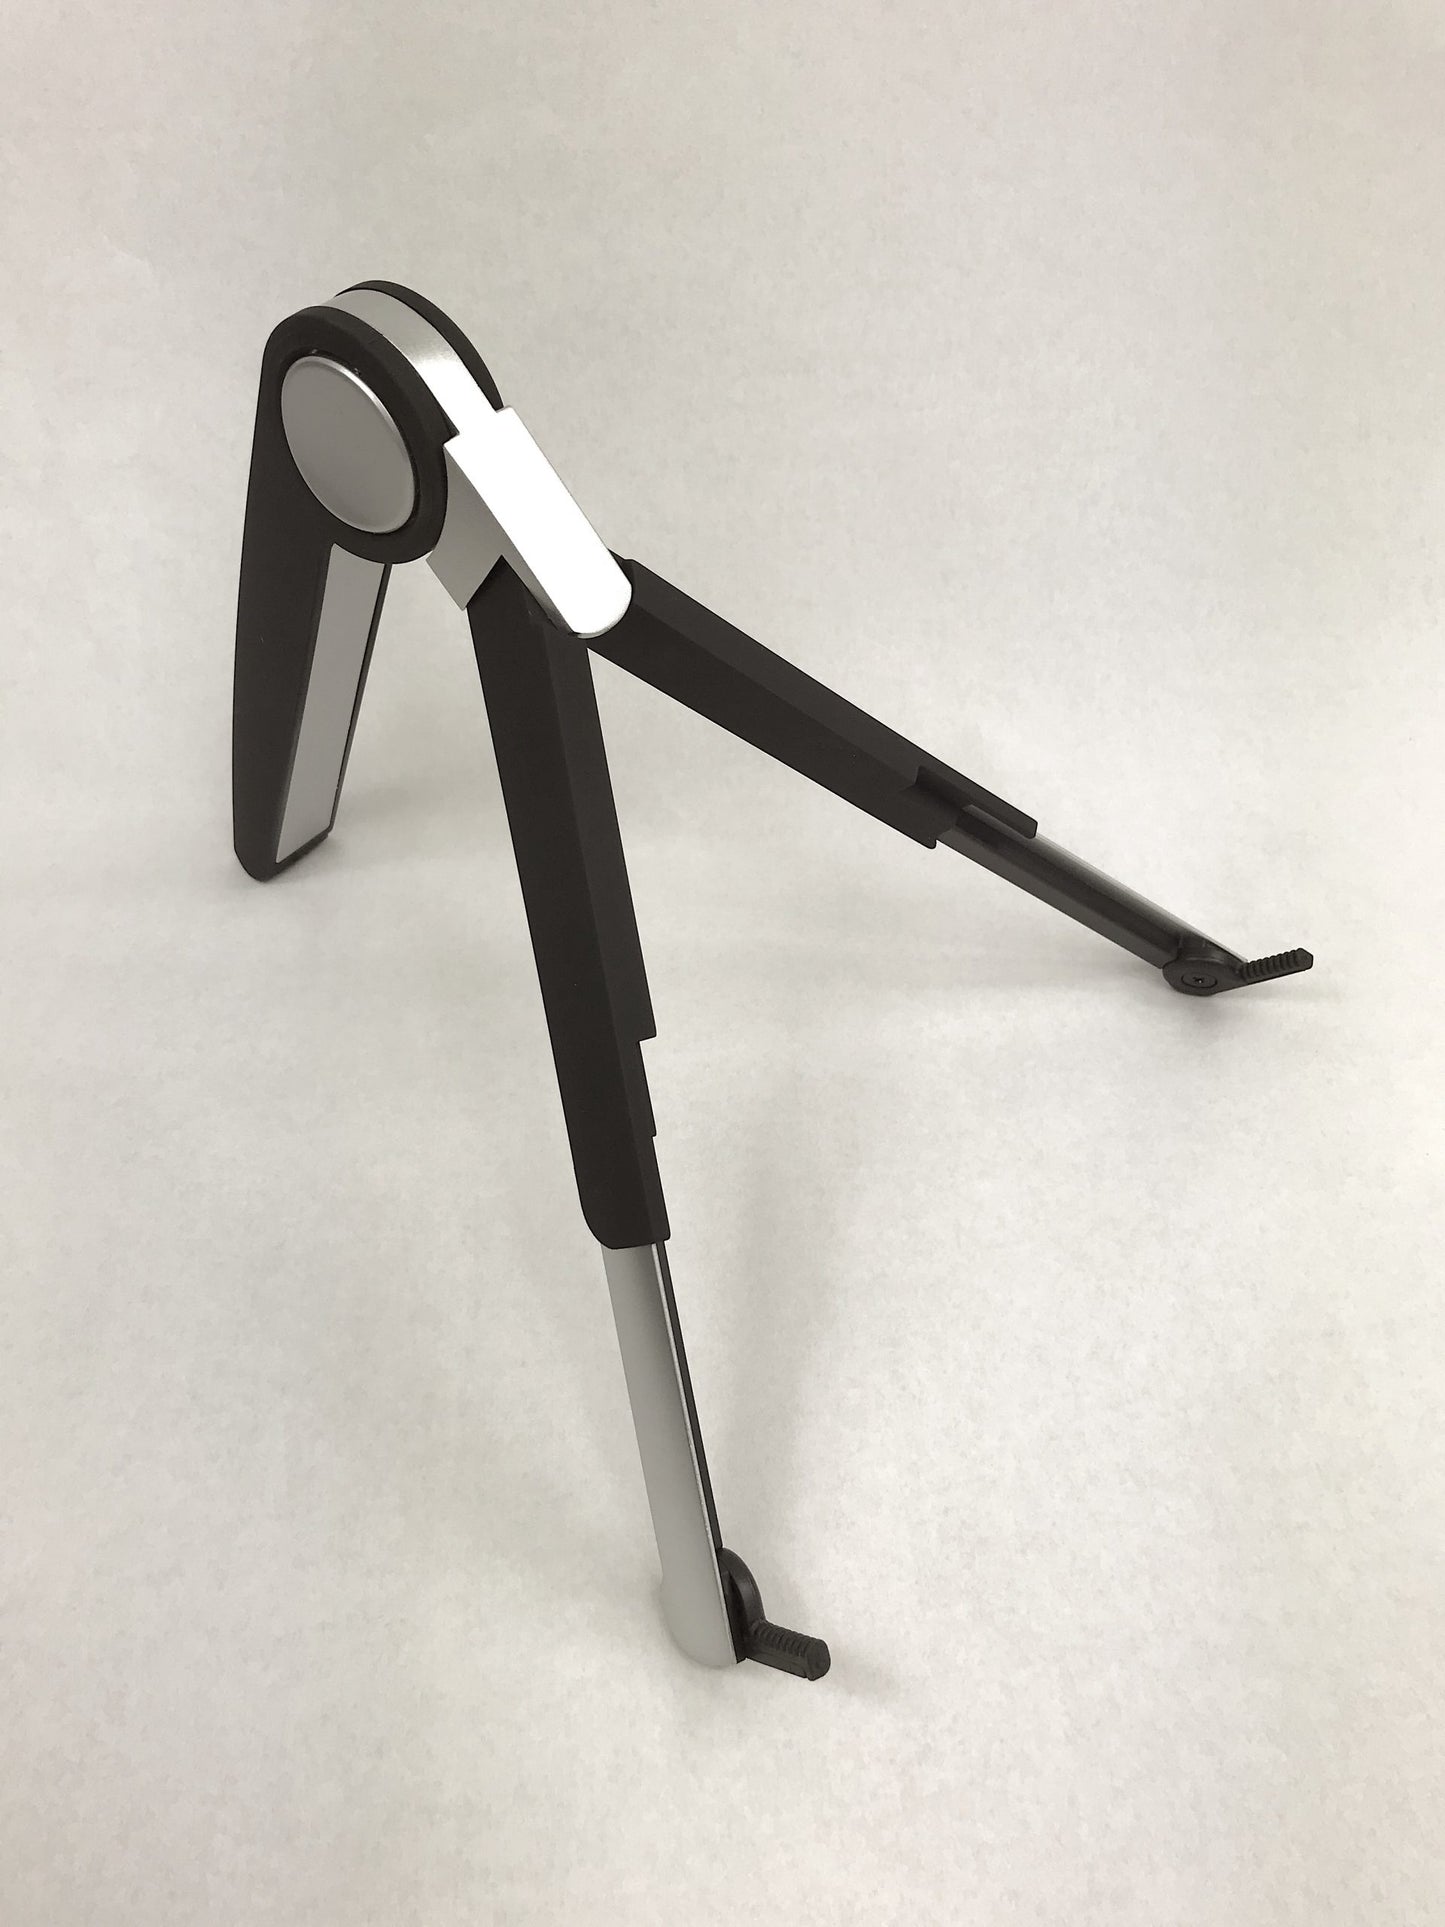 QUICK ERGO STAND - compact stand that makes it possible to work ergonomically